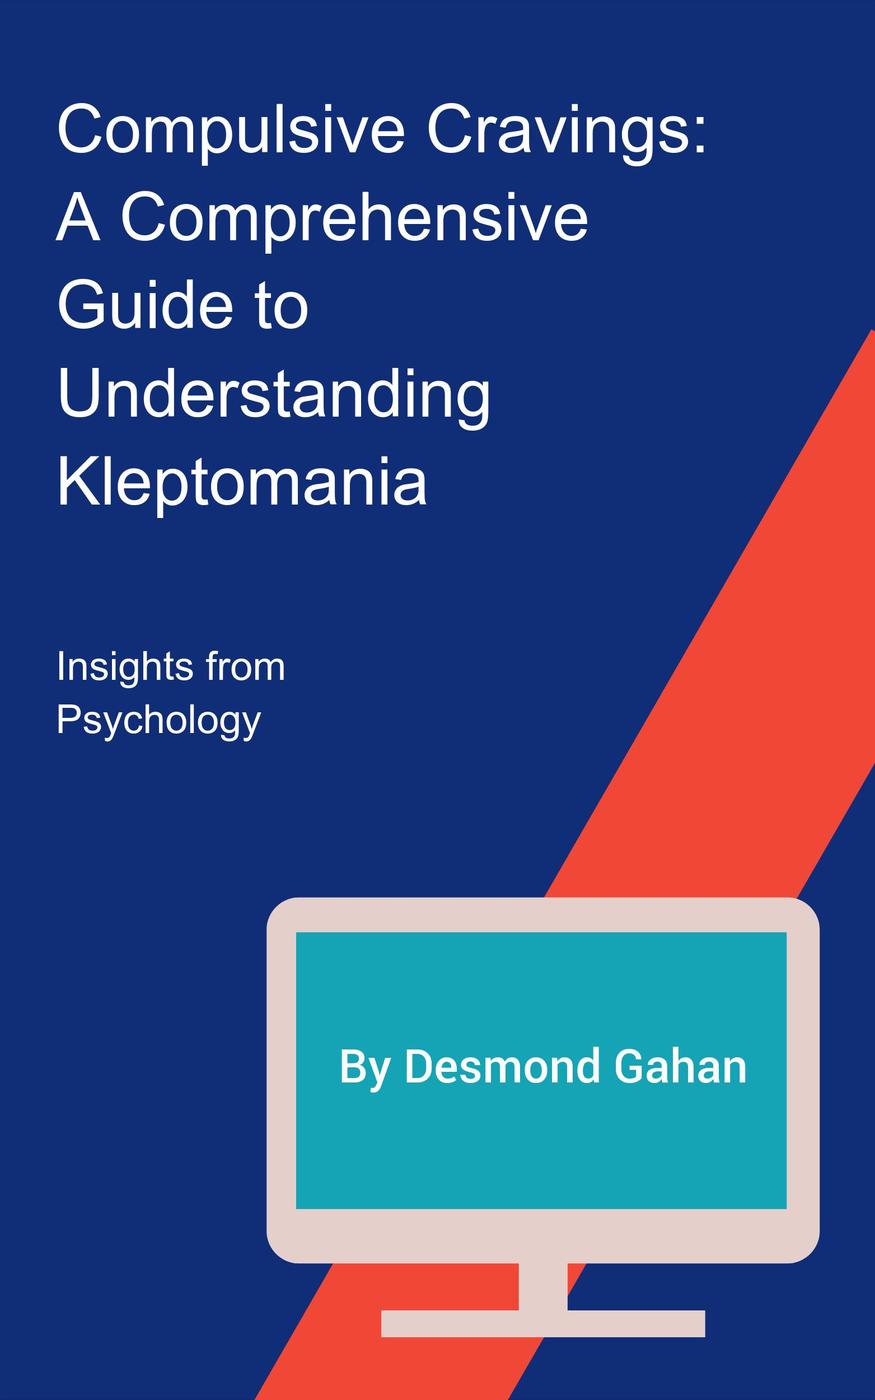 Link to Compulsive Cravings: A Comprehensive Guide to Understanding Kleptomania by Desmond Gahan in the catalog